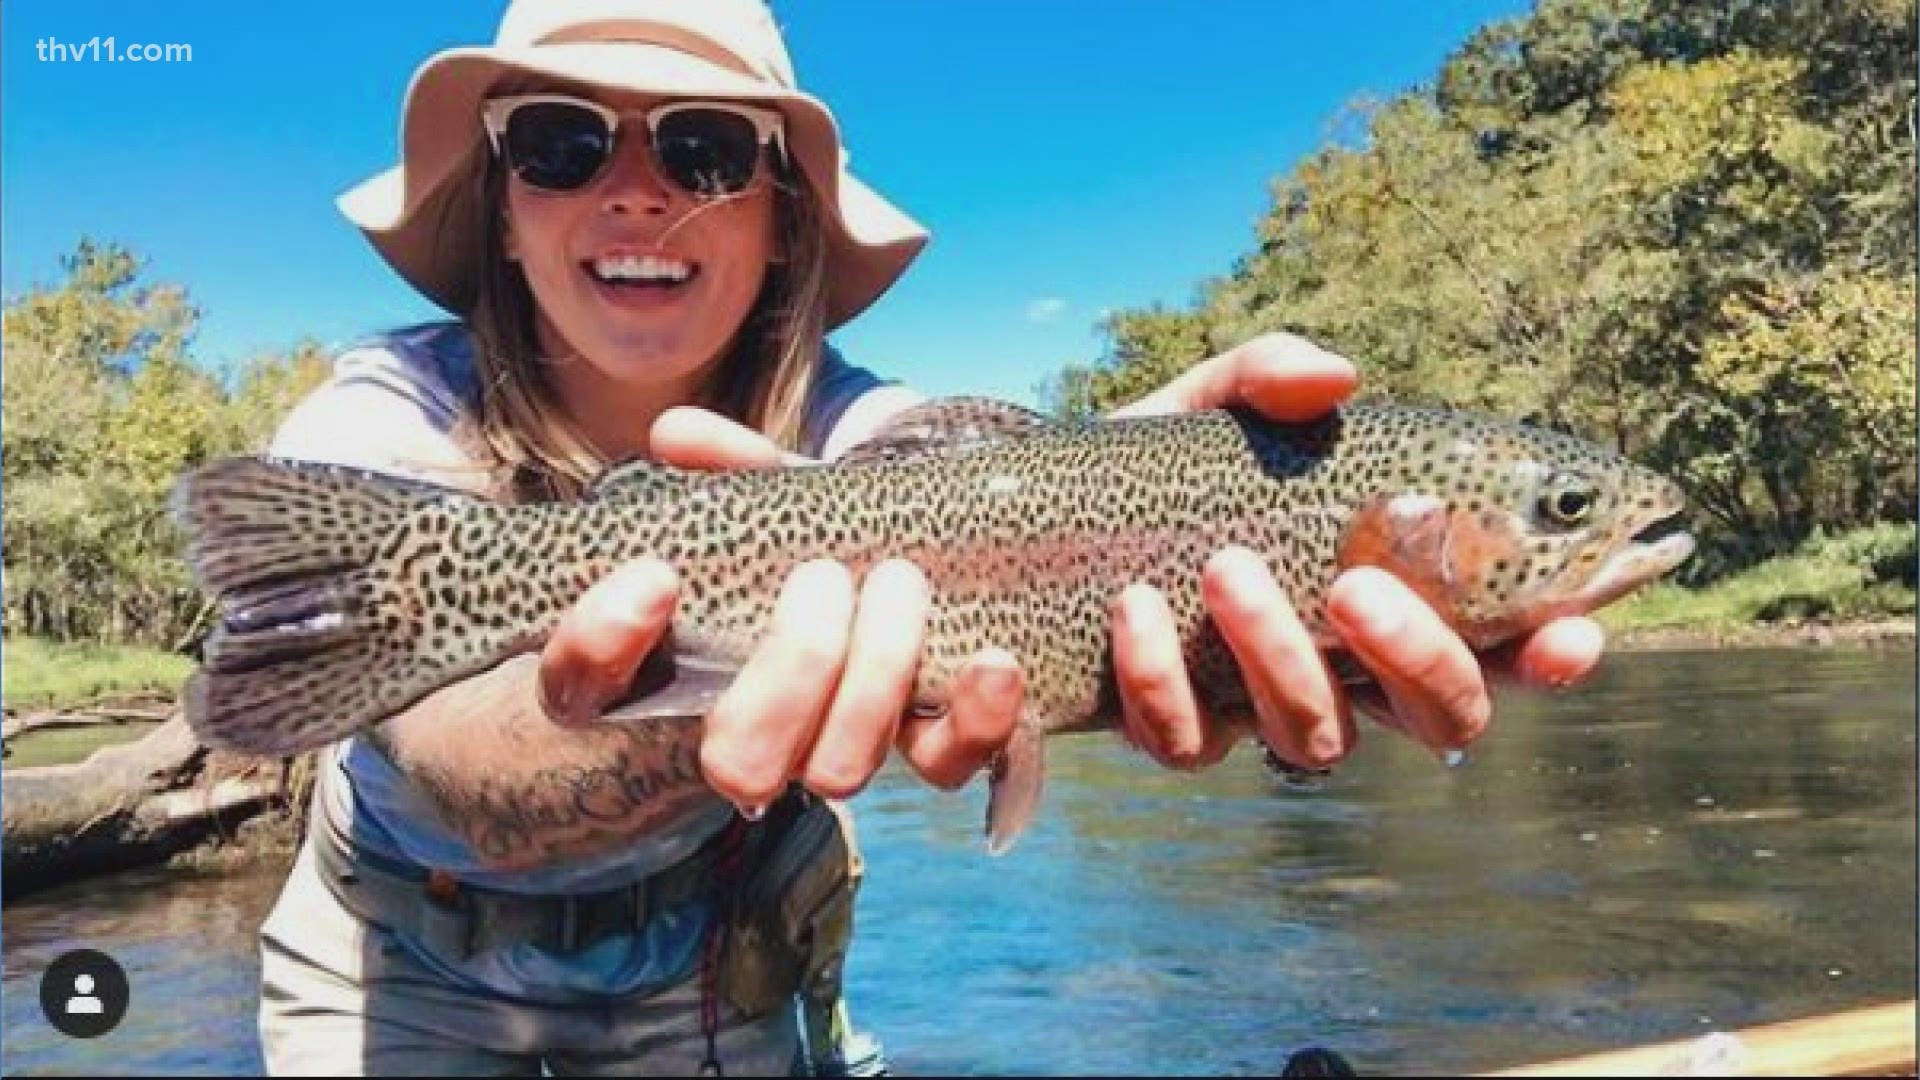 Rebecca Lentz shares the story of how she fell in love with fly-fishing. Learn more about her journey on social media @ladyanglerlentz.